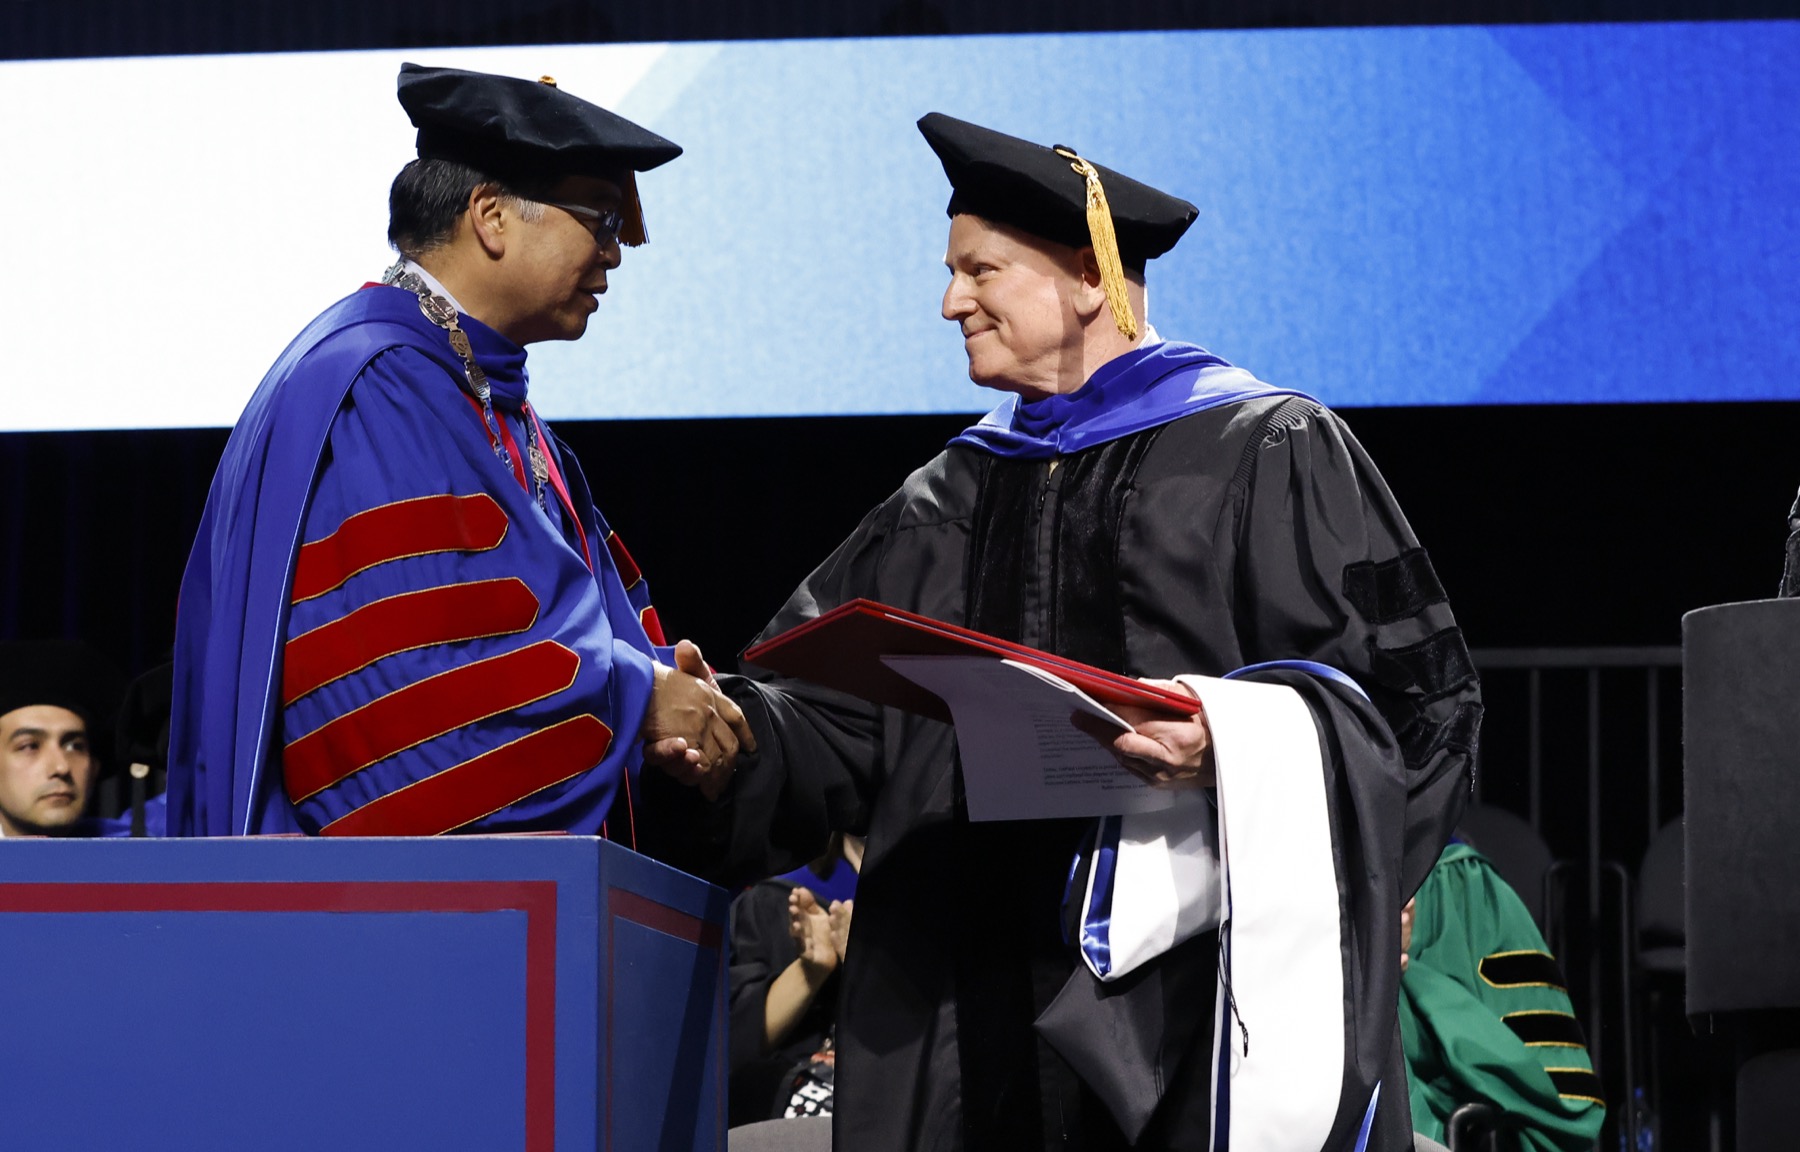 Robert Holland, accepted the posthumous honorary degree on behalf of his wife, Lori Holland, at the Kellstadt Graduate School of Business ceremony.